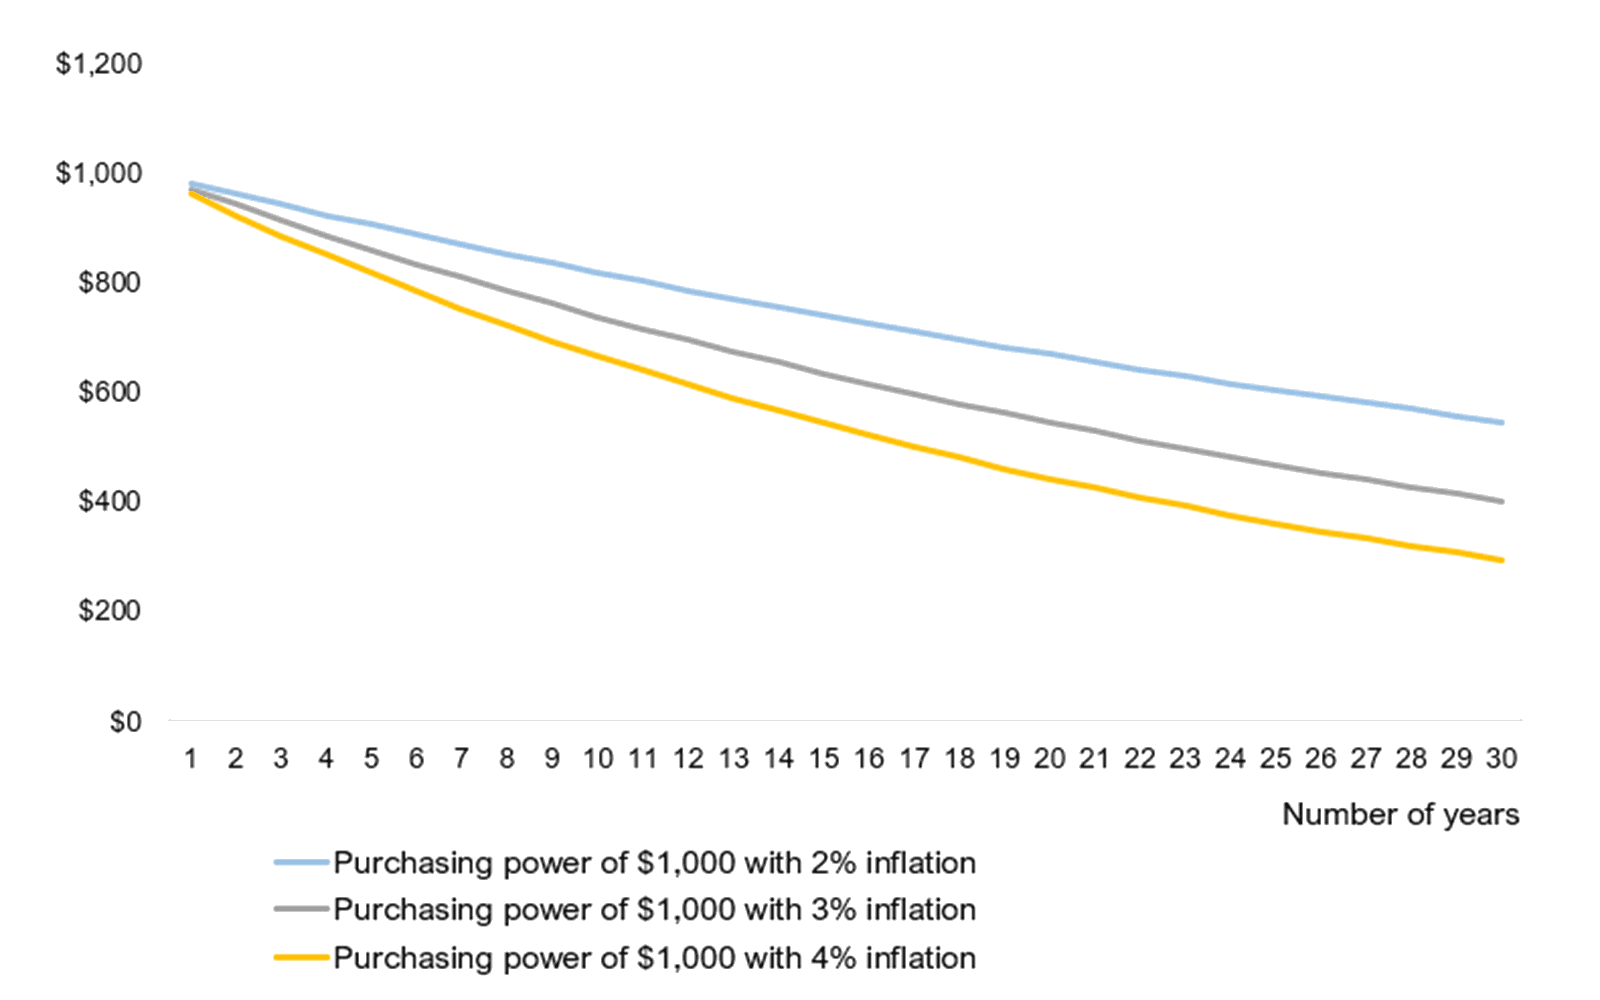 Purchasing power of $1,000 with different inflation levels over time.